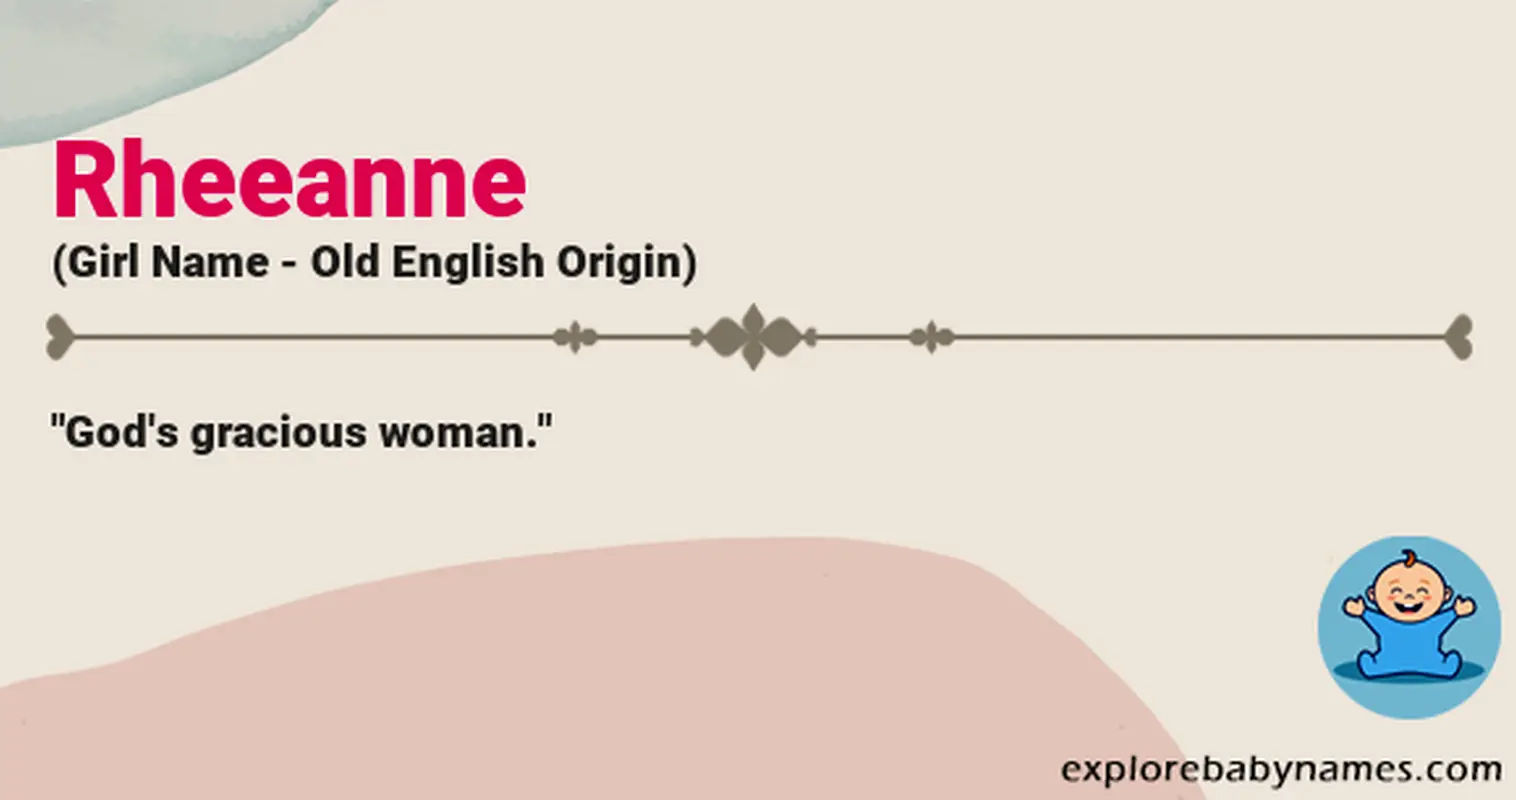 Meaning of Rheeanne